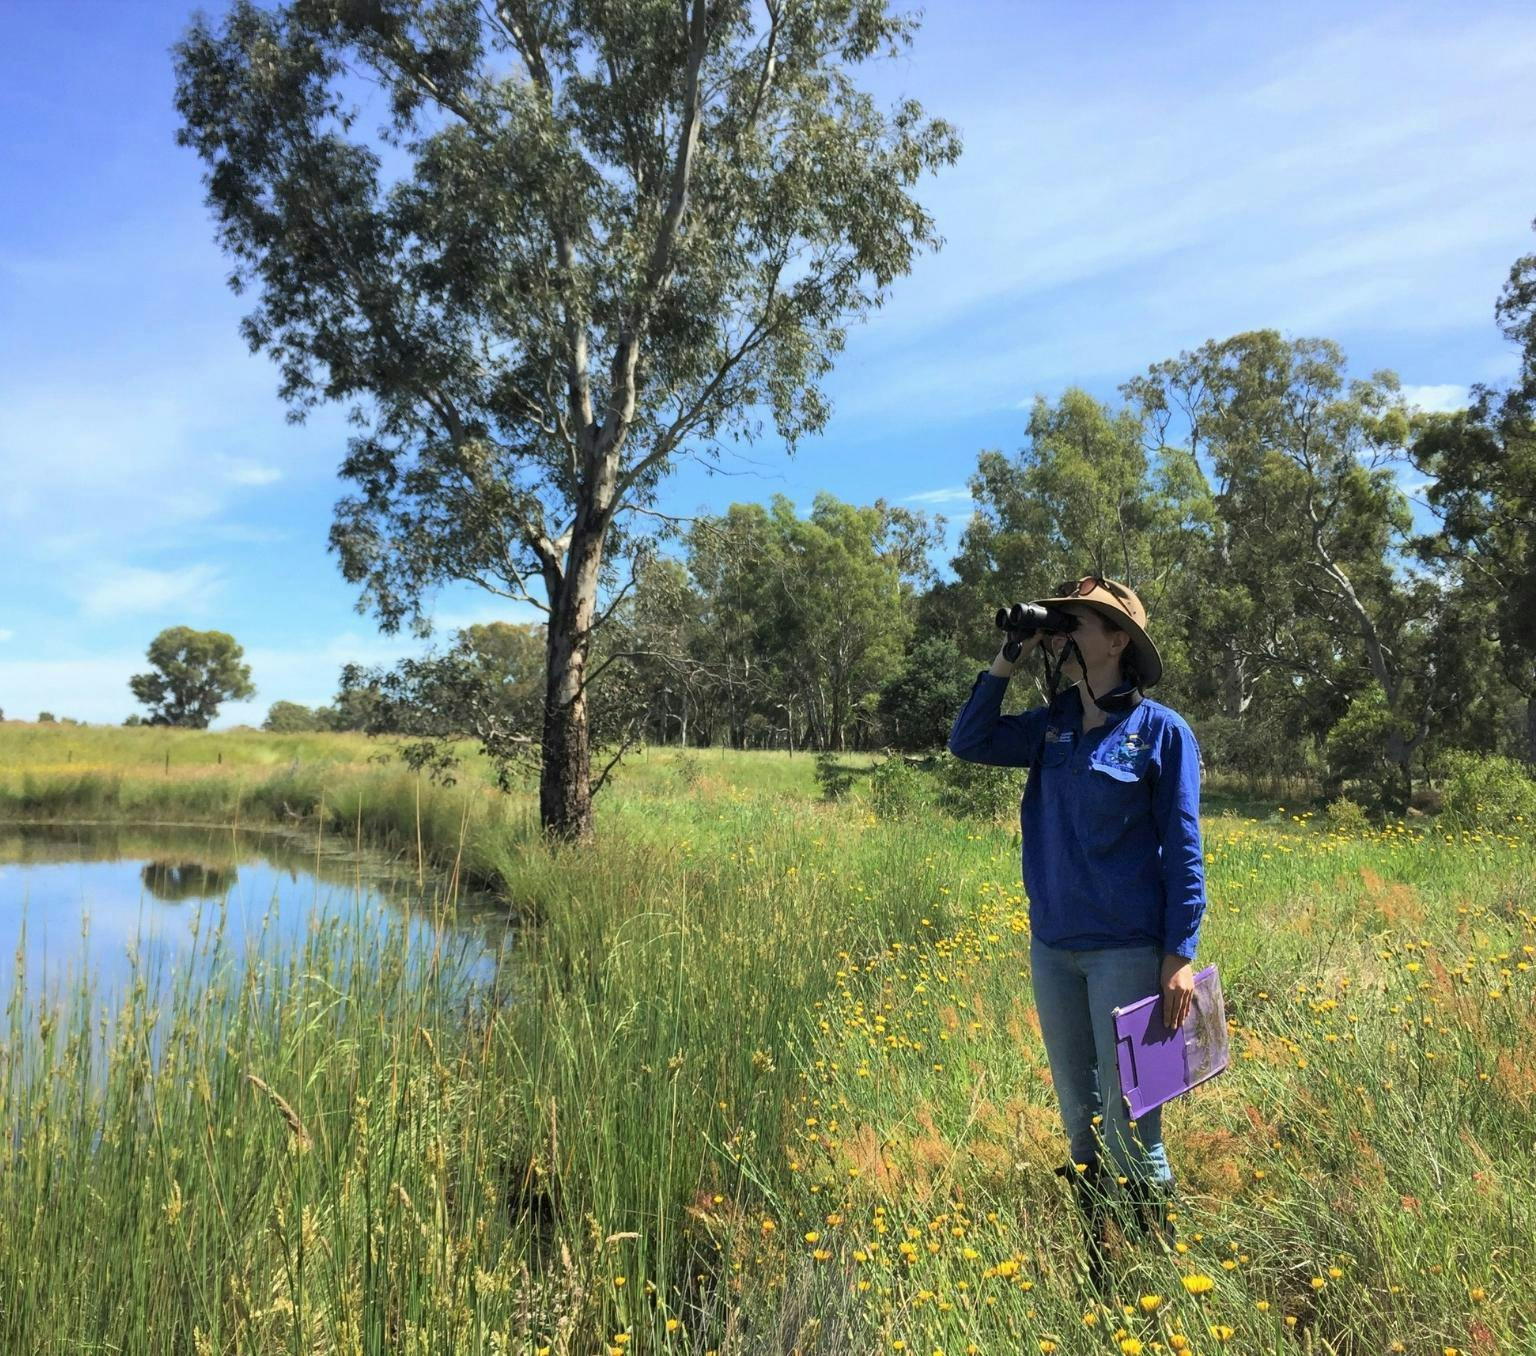 Angelina is standing in a field of long grass looking through binoculars over a pond. There are trees in the background. Angelina is wearing a broad brimmed hat, blue collared shirt and light blue jeans